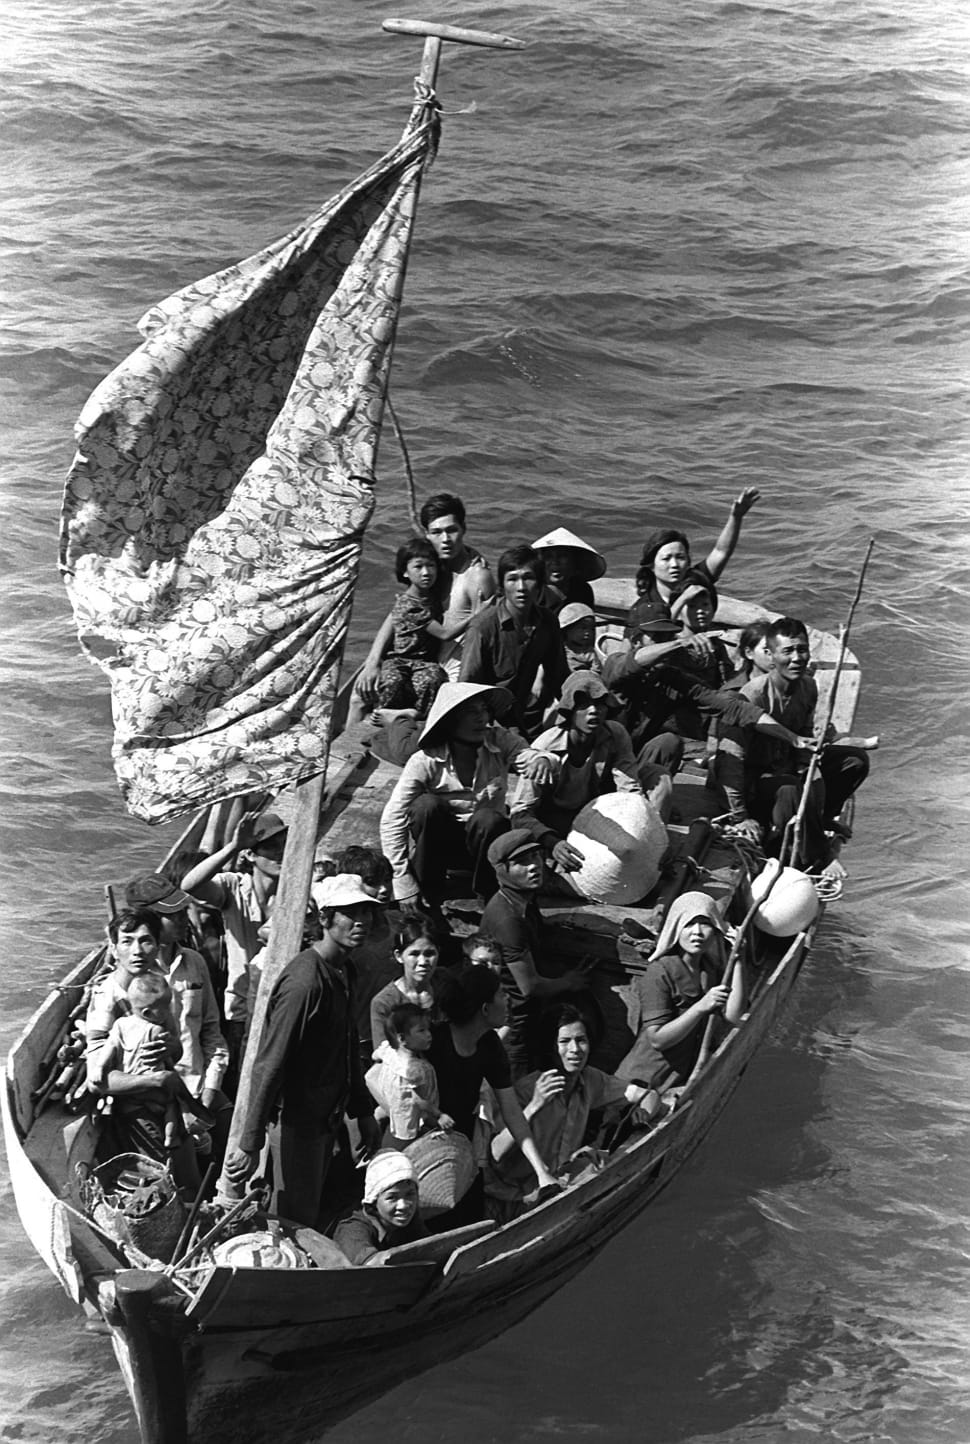 35 Vietnamese Refugees, Boat People, nautical vessel, water preview